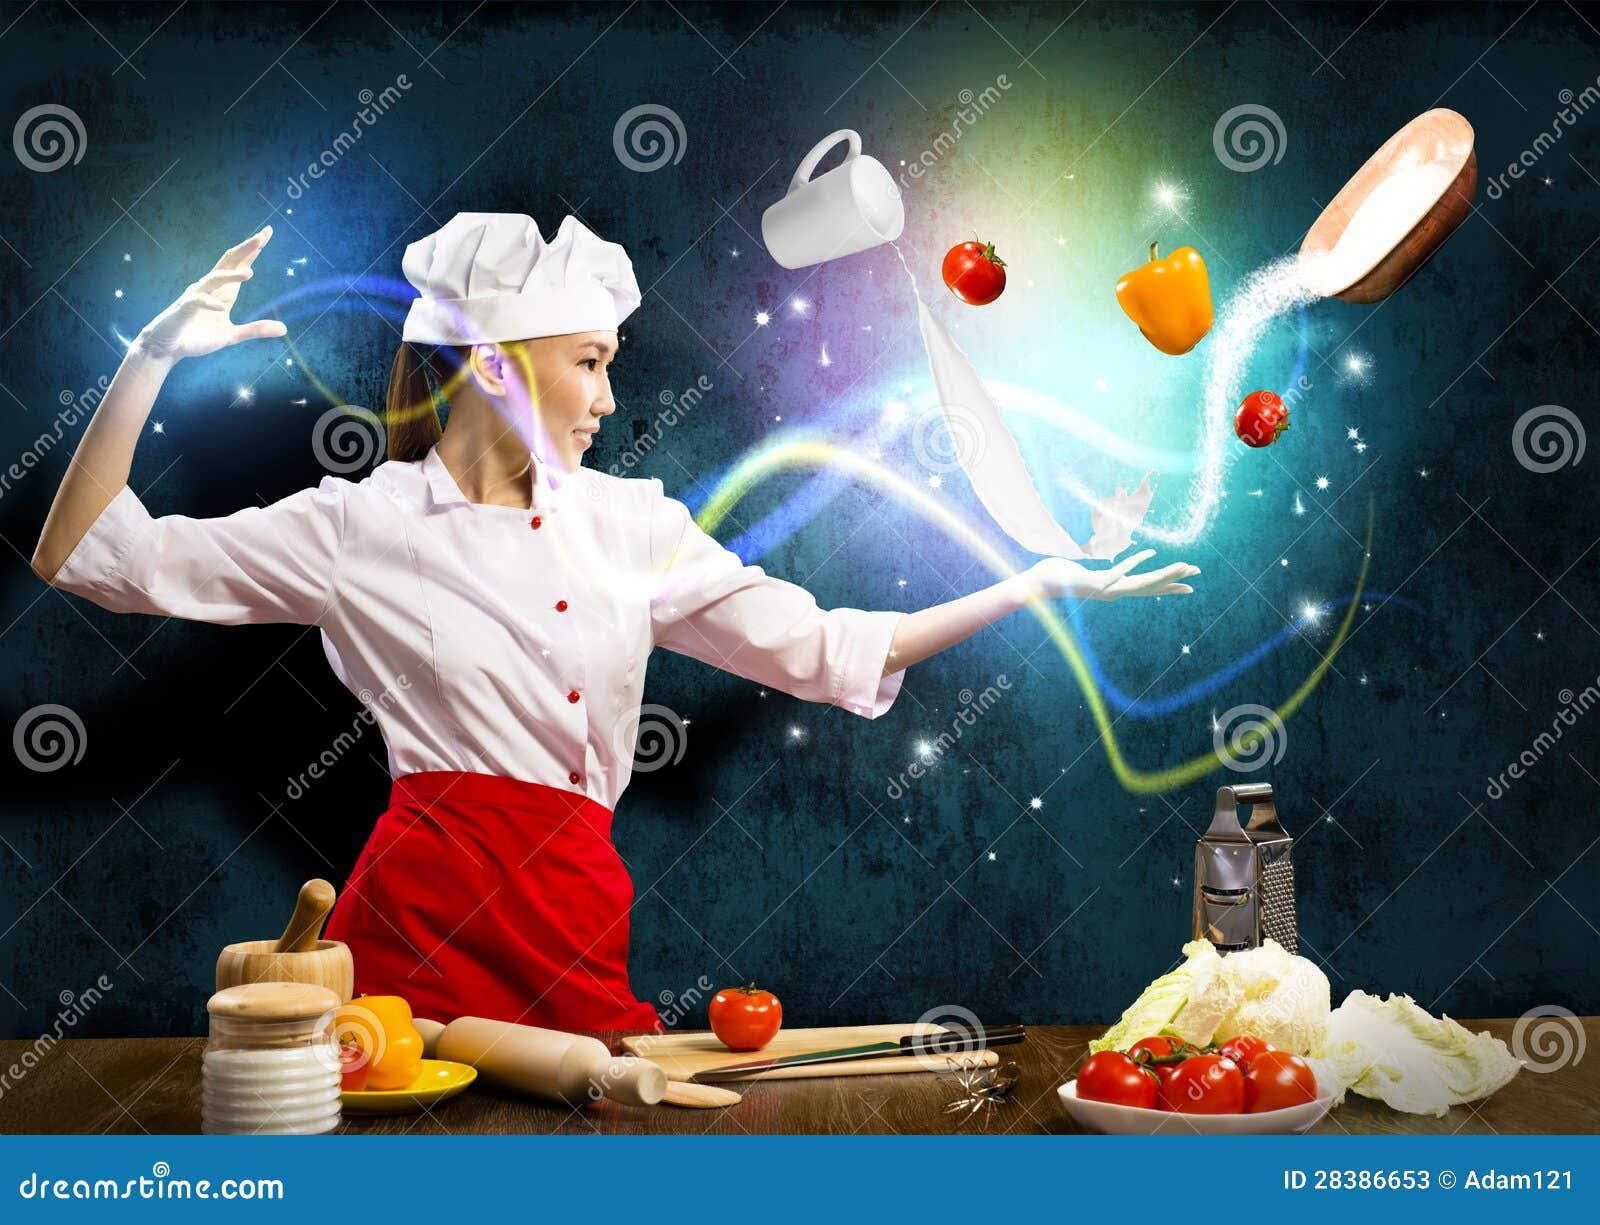 Magic in the kitchen stock image. Image of attractive - 28386653